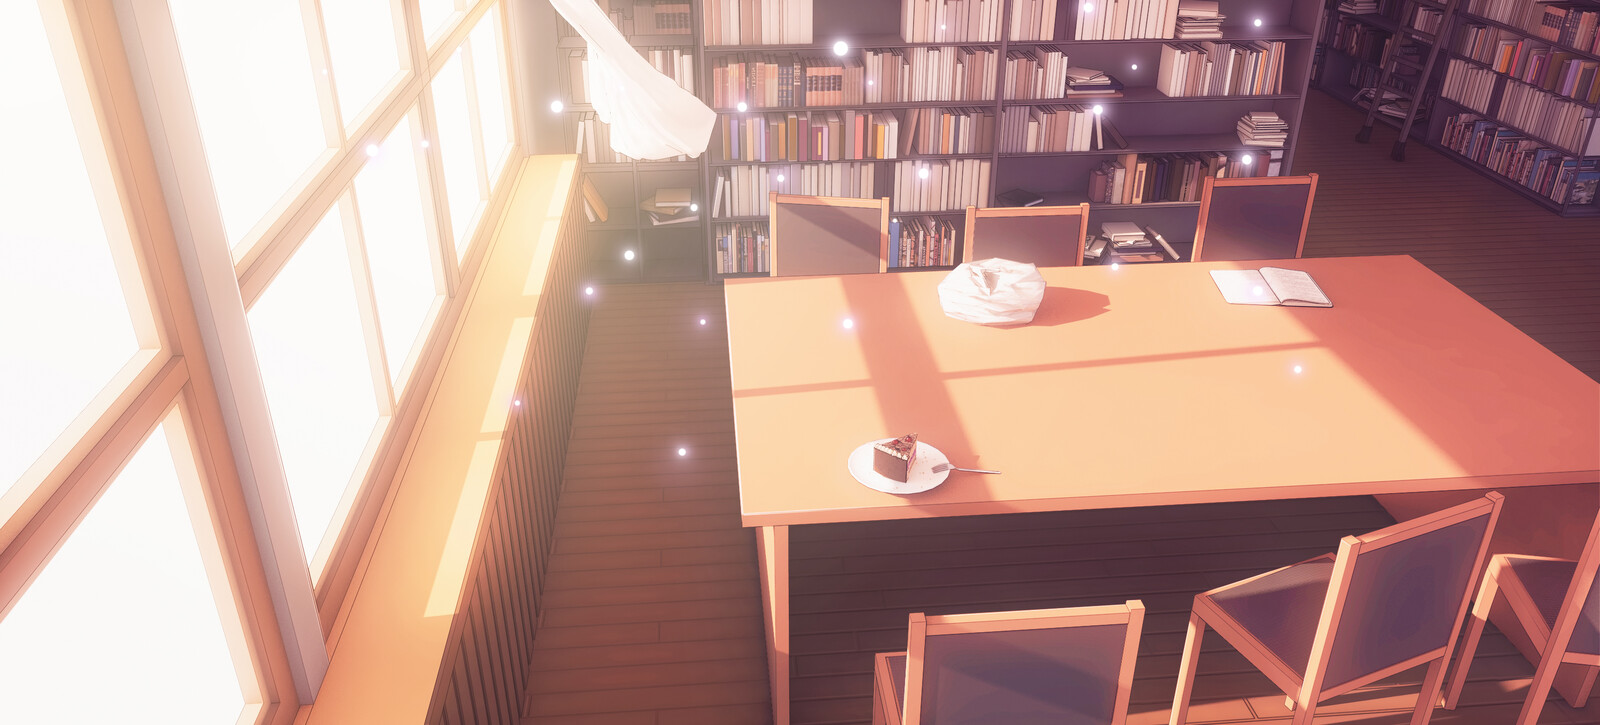 Library. This is remake of the same scene from Clannad